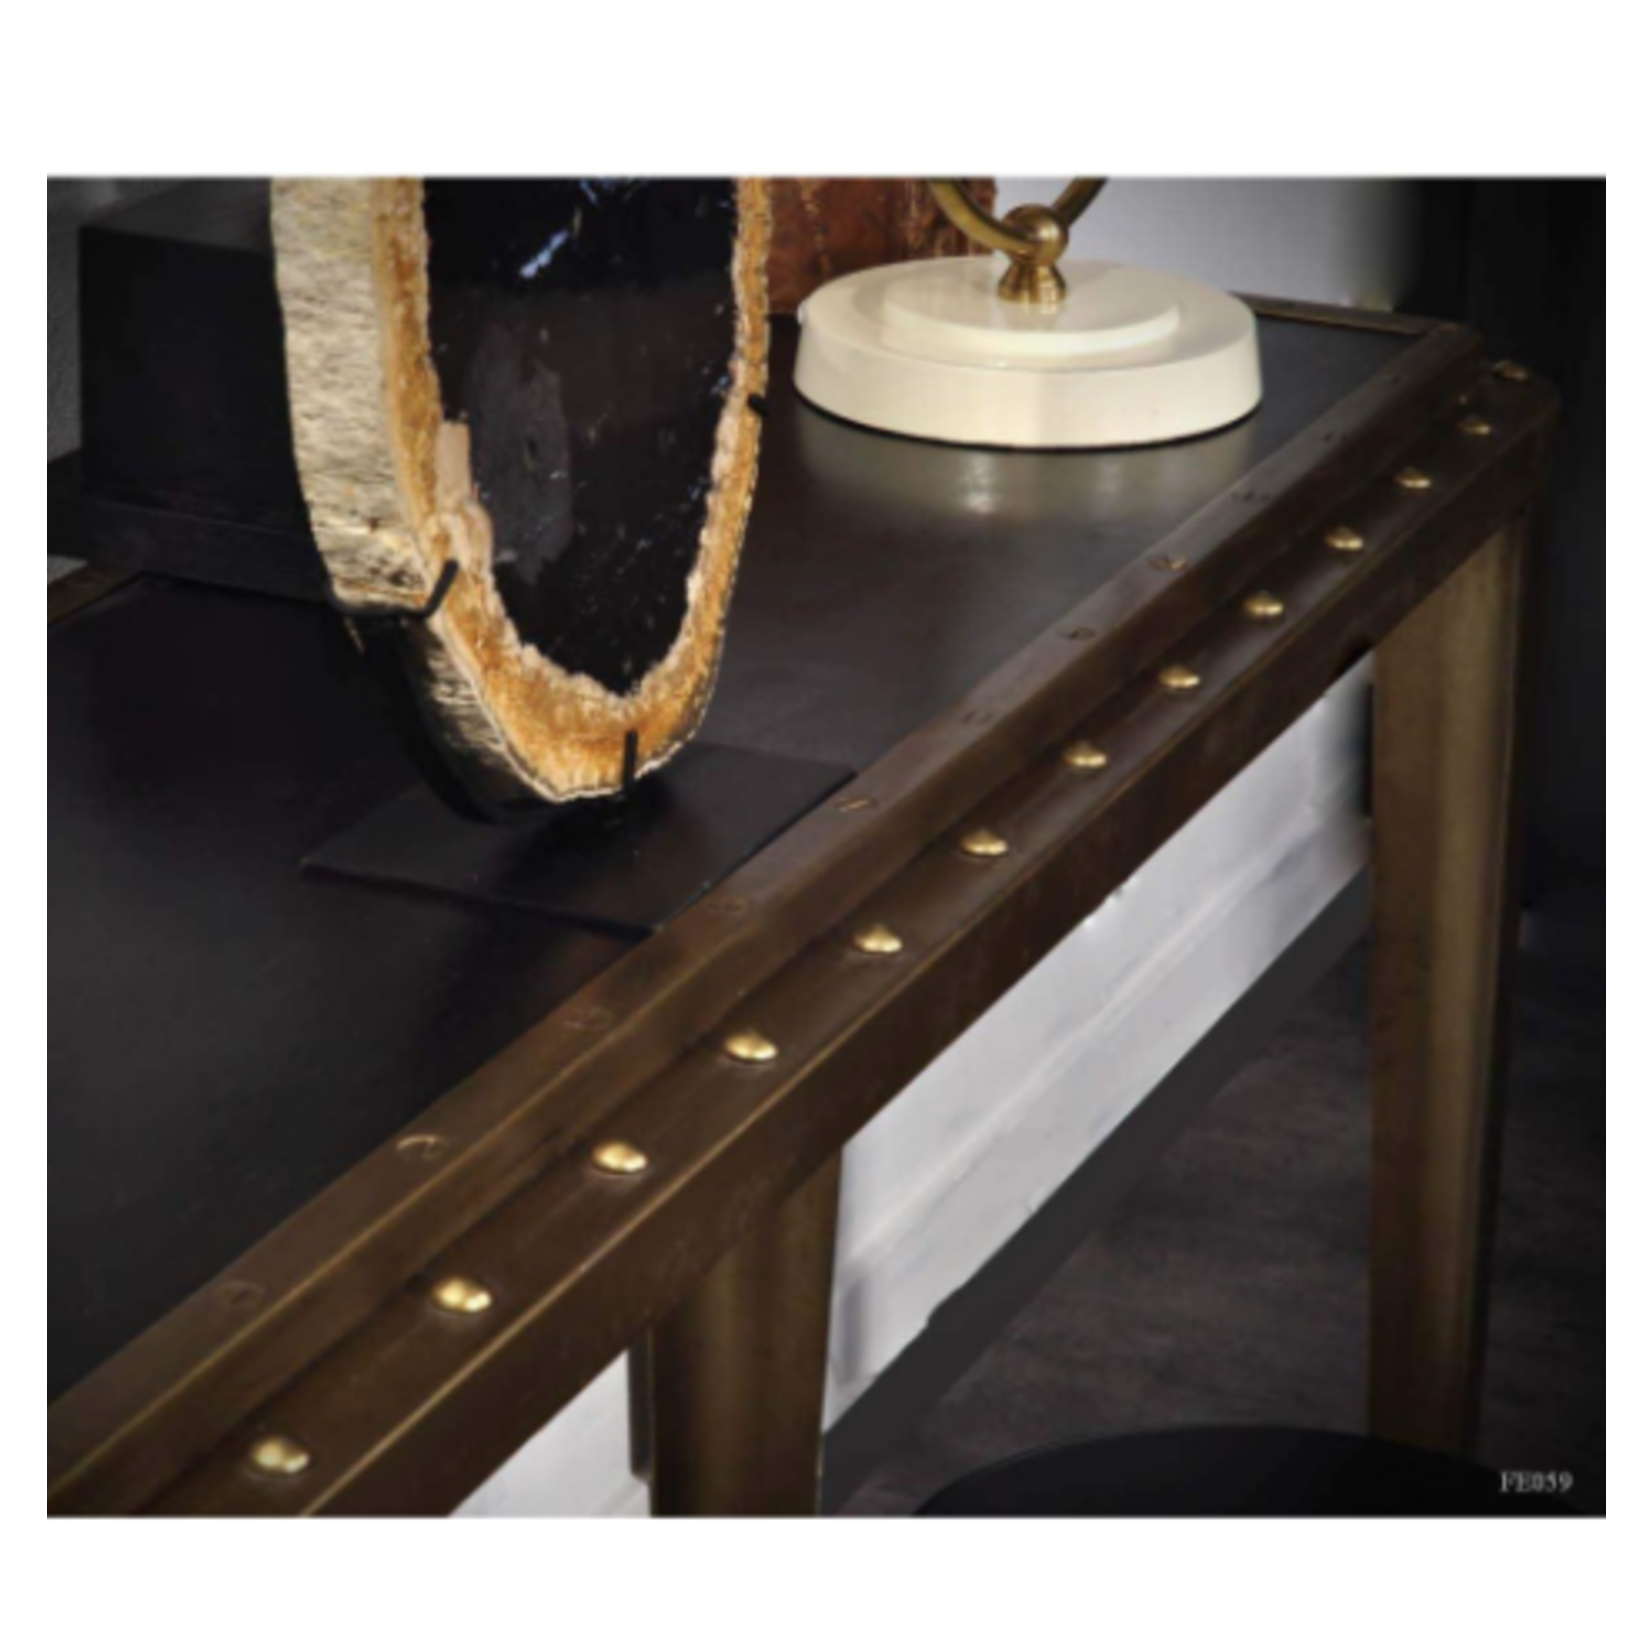 OBJET DE CURIOSITE BRASS AND WOOD INDUSTRIAL-CHIC CONSOLE